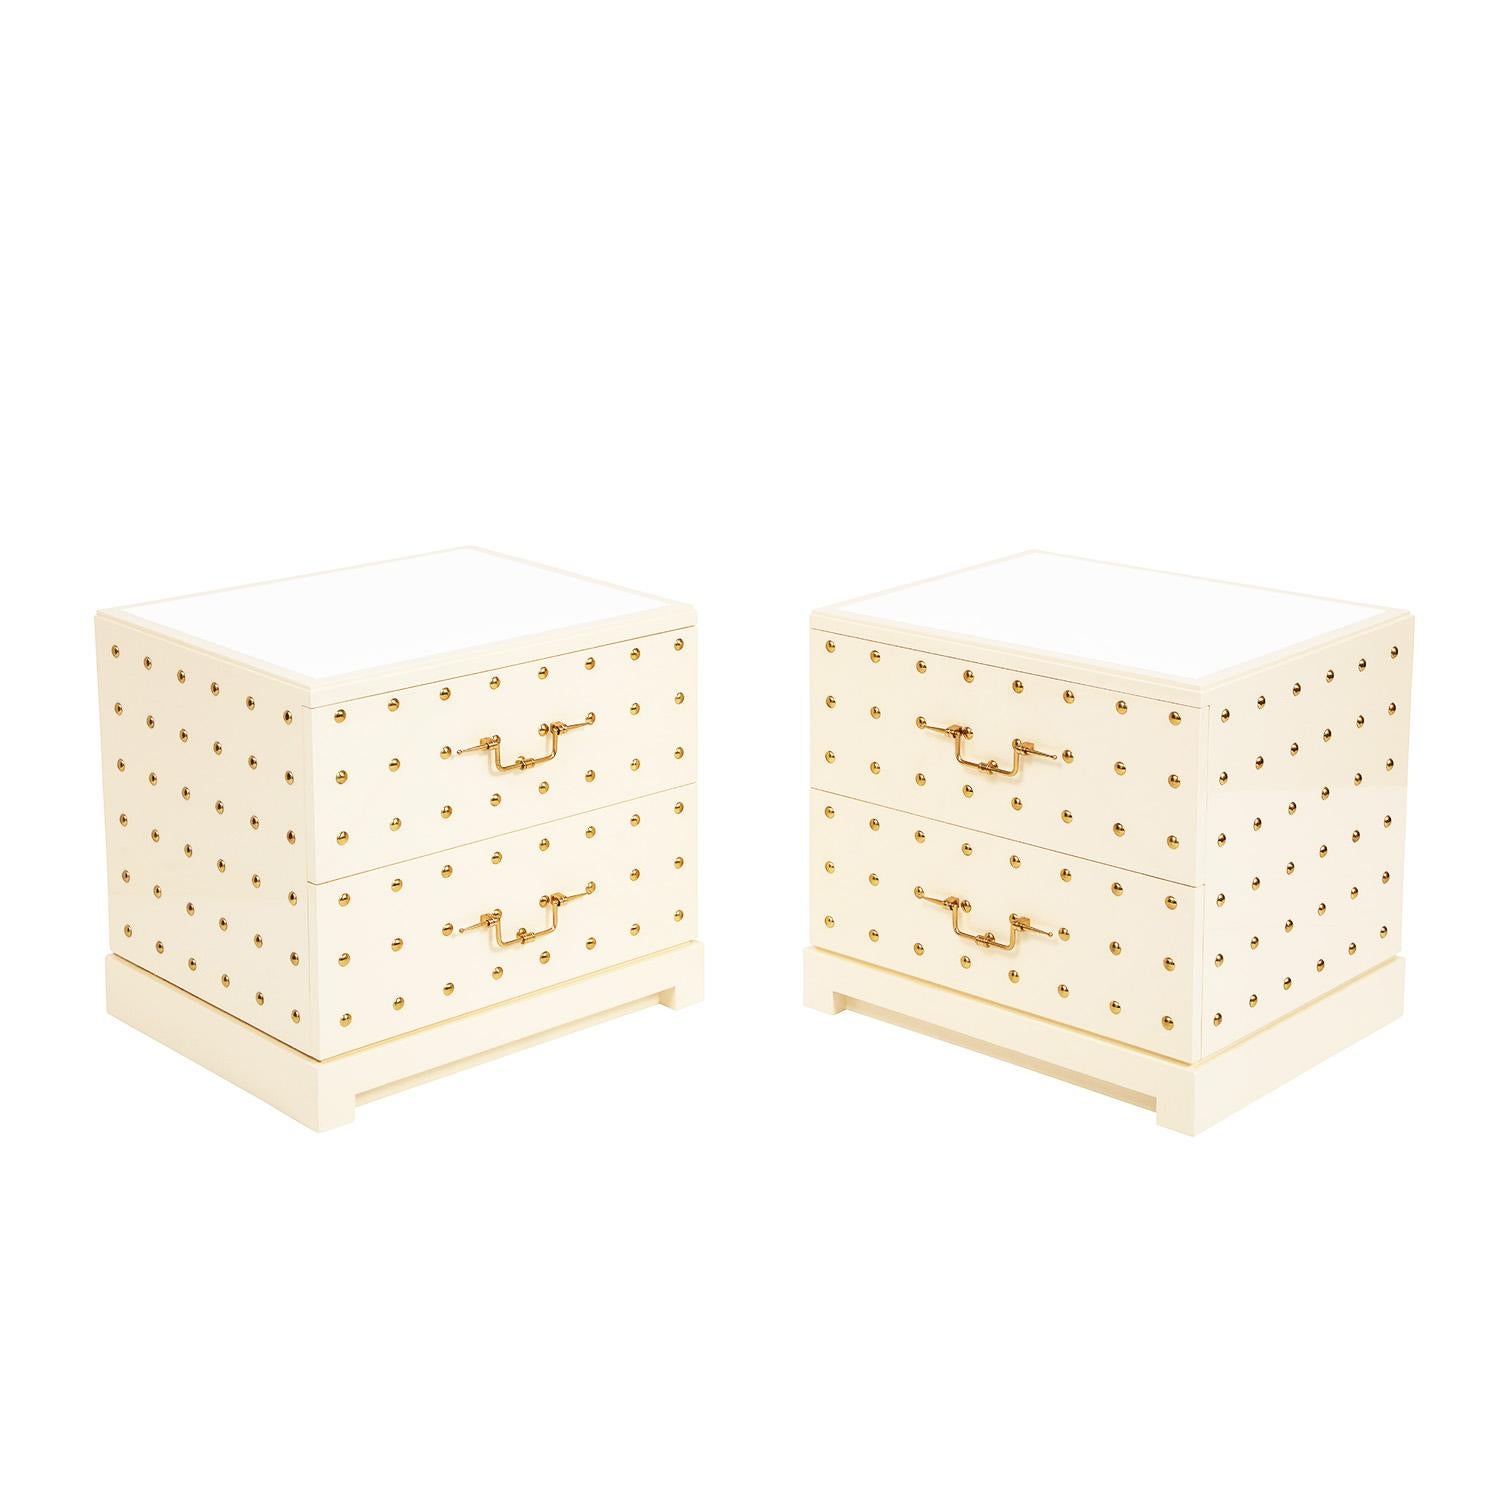 Pair of bedside tables model 223S, each with 2 drawers, in bone lacquer with original white glass tops and brass studs by Tommi Parzinger for Parzinger Originals, American 1950's. These bedside tables are rare and exude the glamor and elegance that